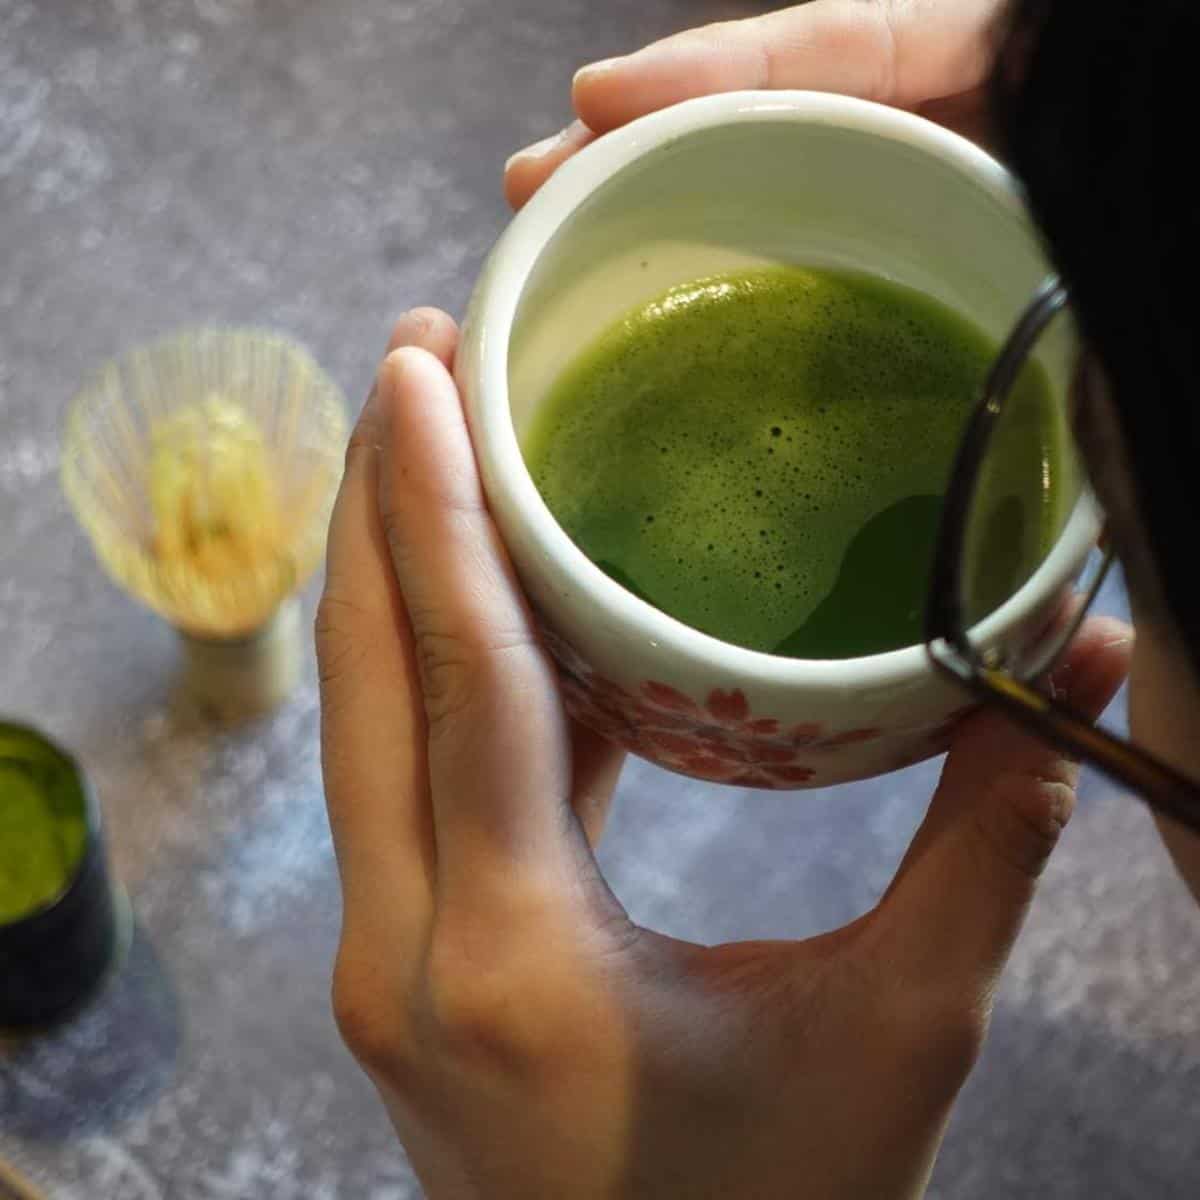 How to drink and serve Japanese green tea